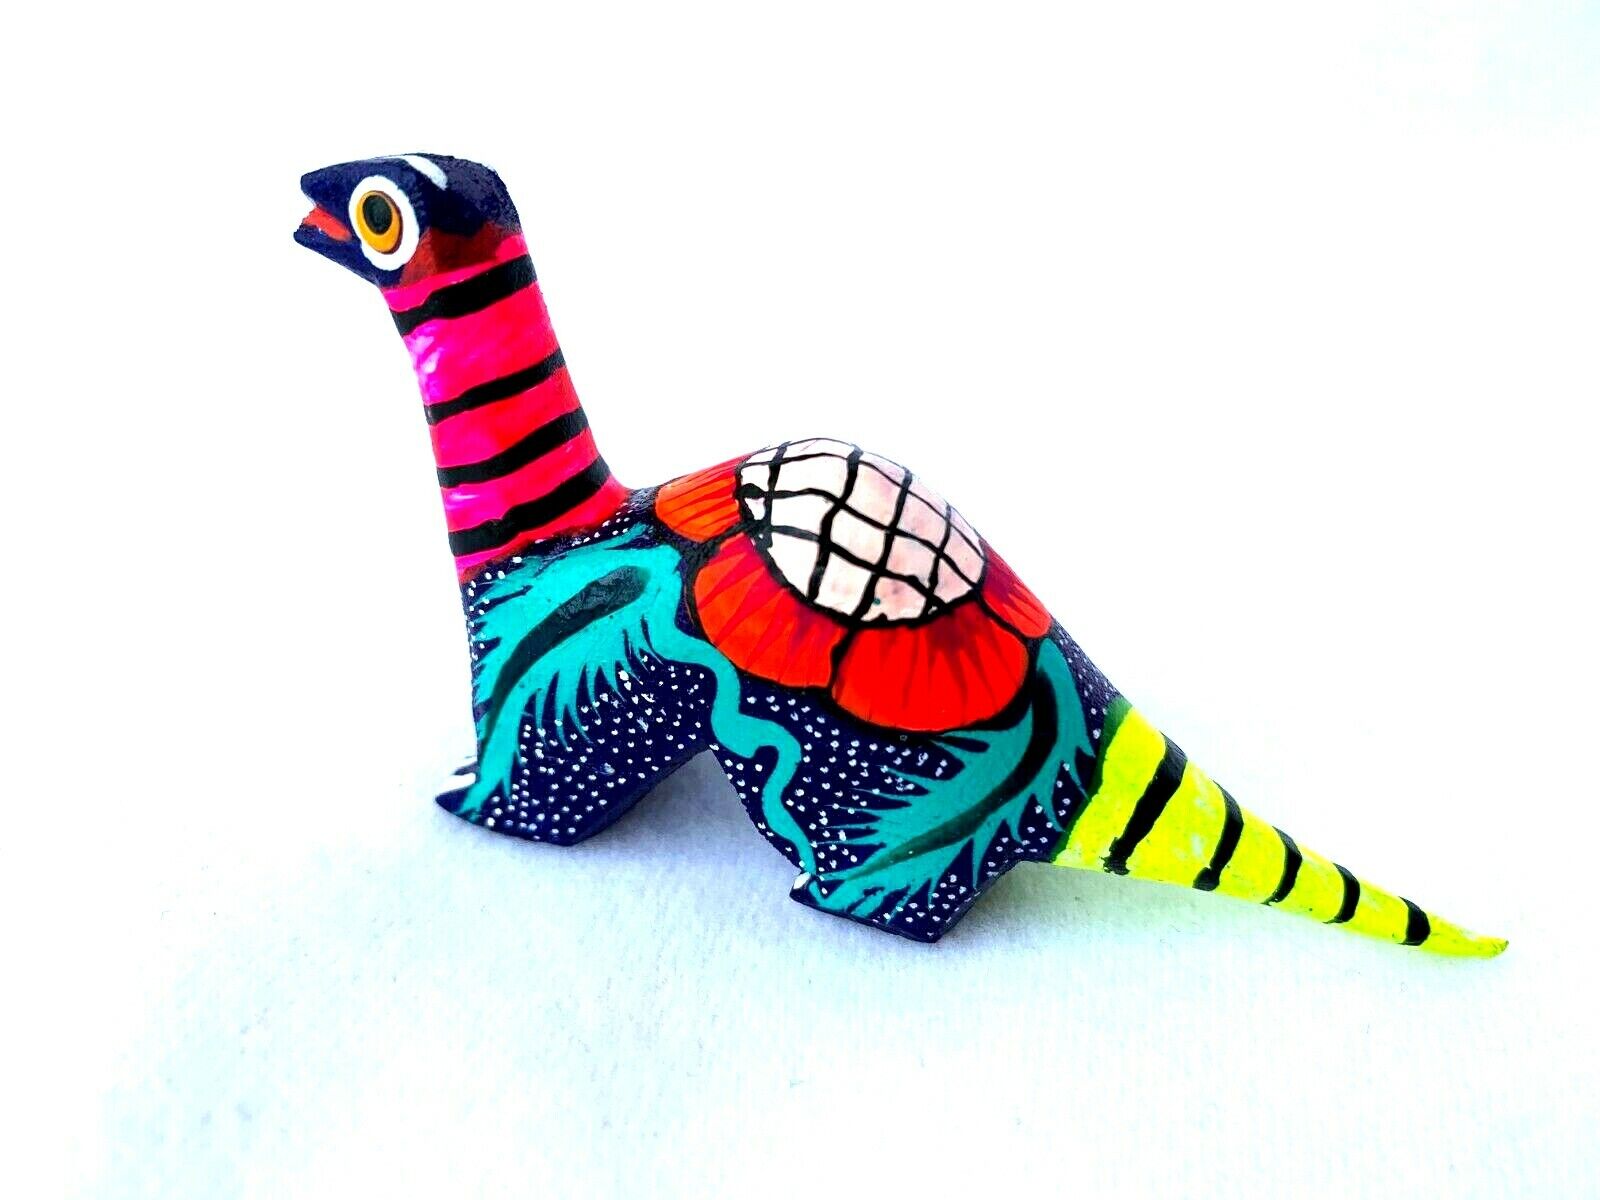 LITTLE DINOSAUR ALEBRIJE-  HAND CRAFTED WOOD CARVING OAXACA, MEXICO